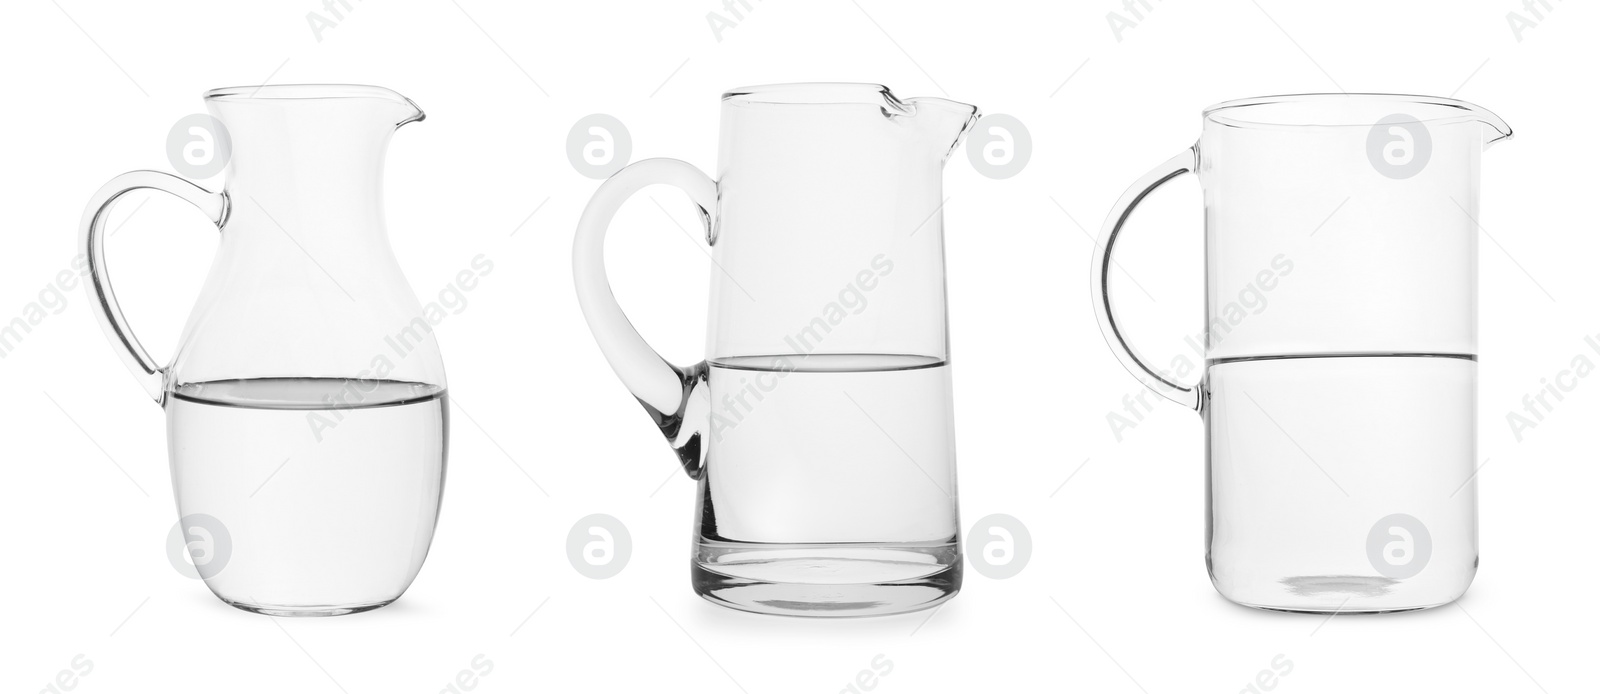 Image of Glass jugs half-filled with water isolated on white, collection